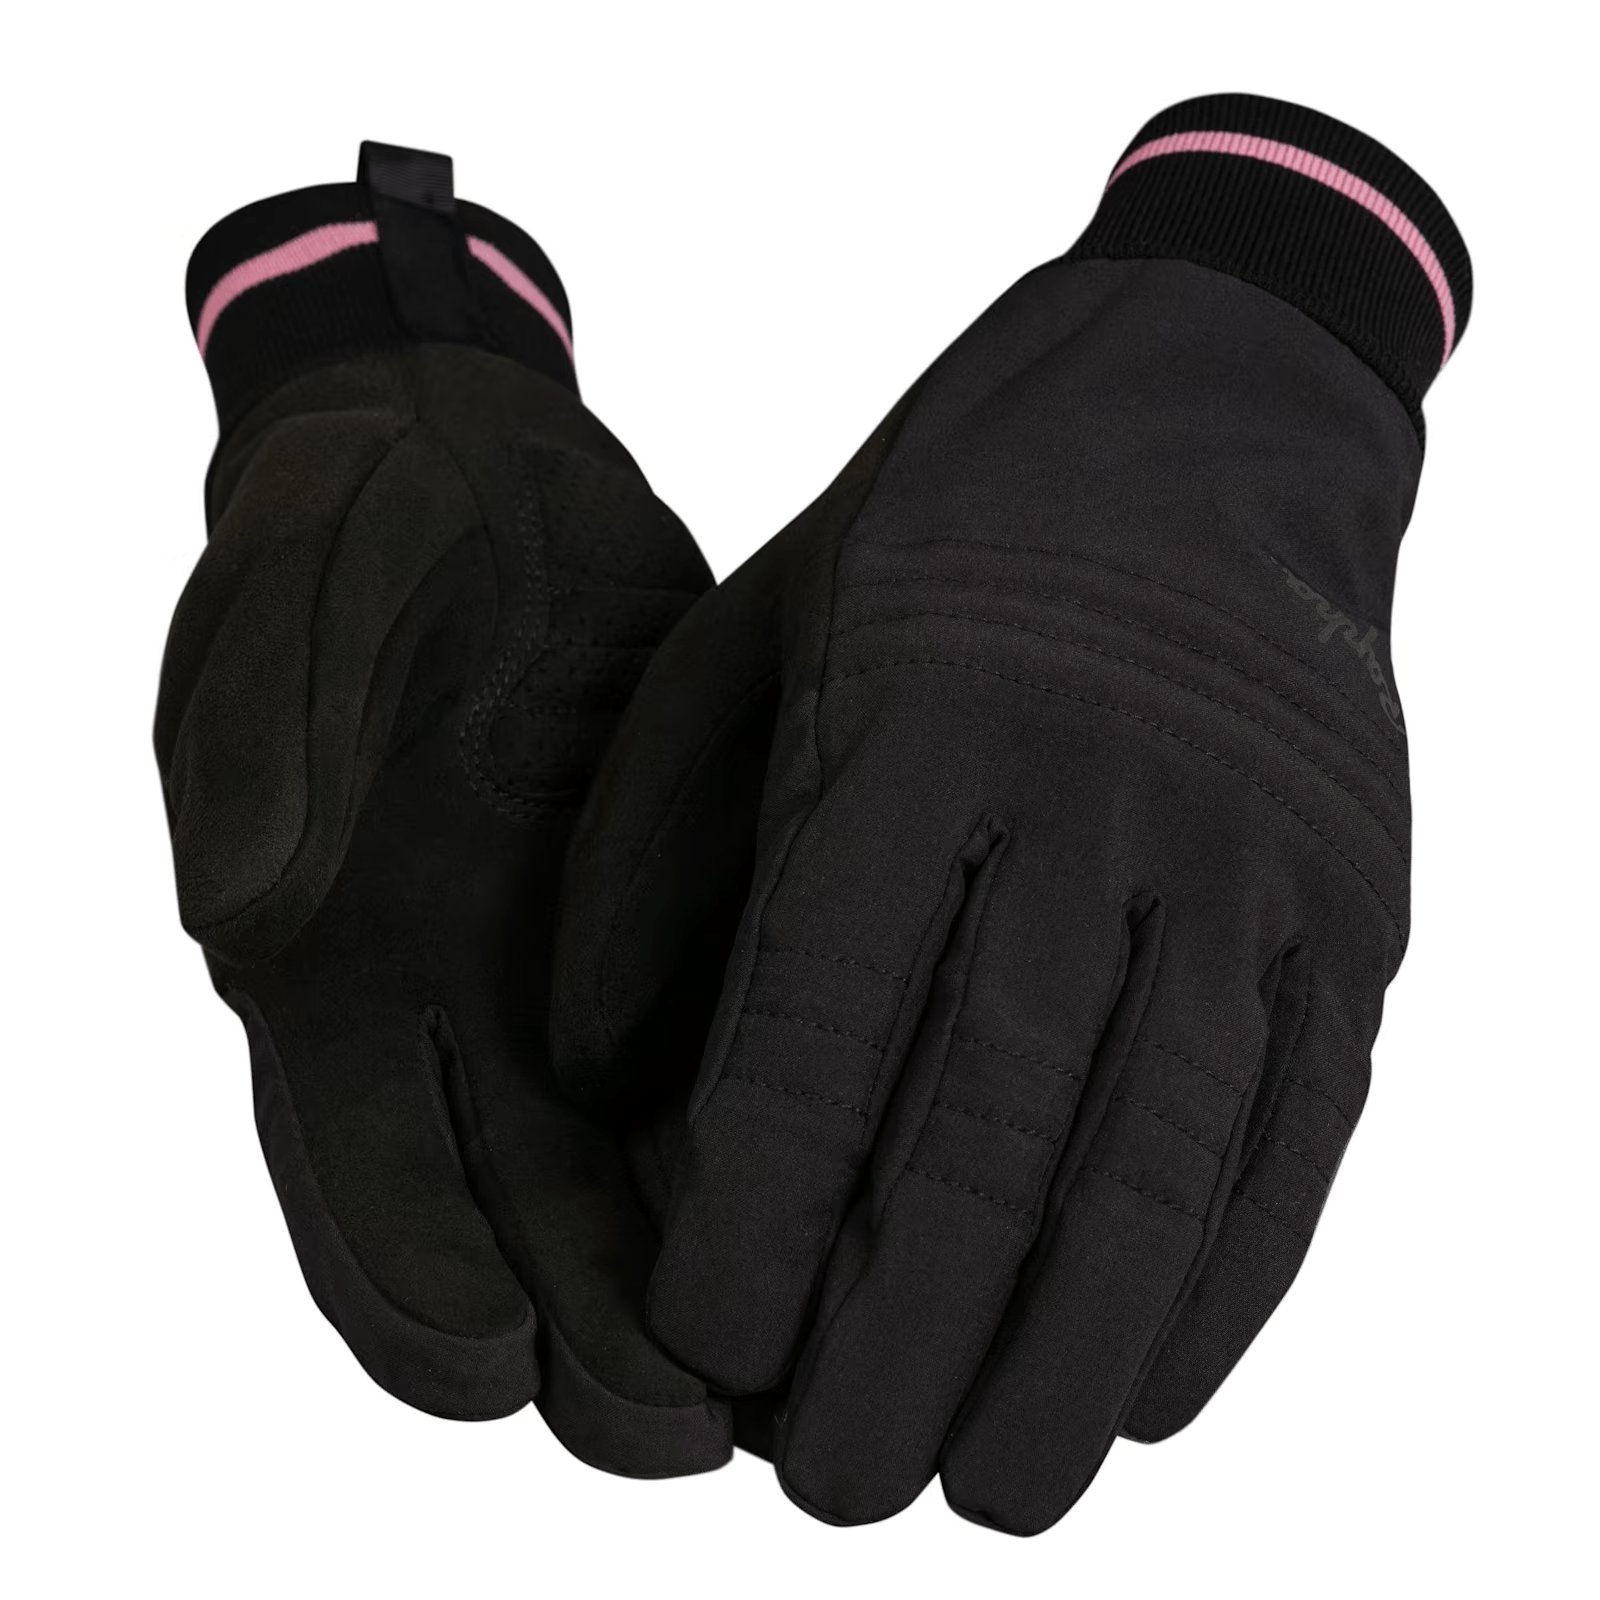 Rapha Winter Gloves Black / XS Apparel - Apparel Accessories - Gloves - Road